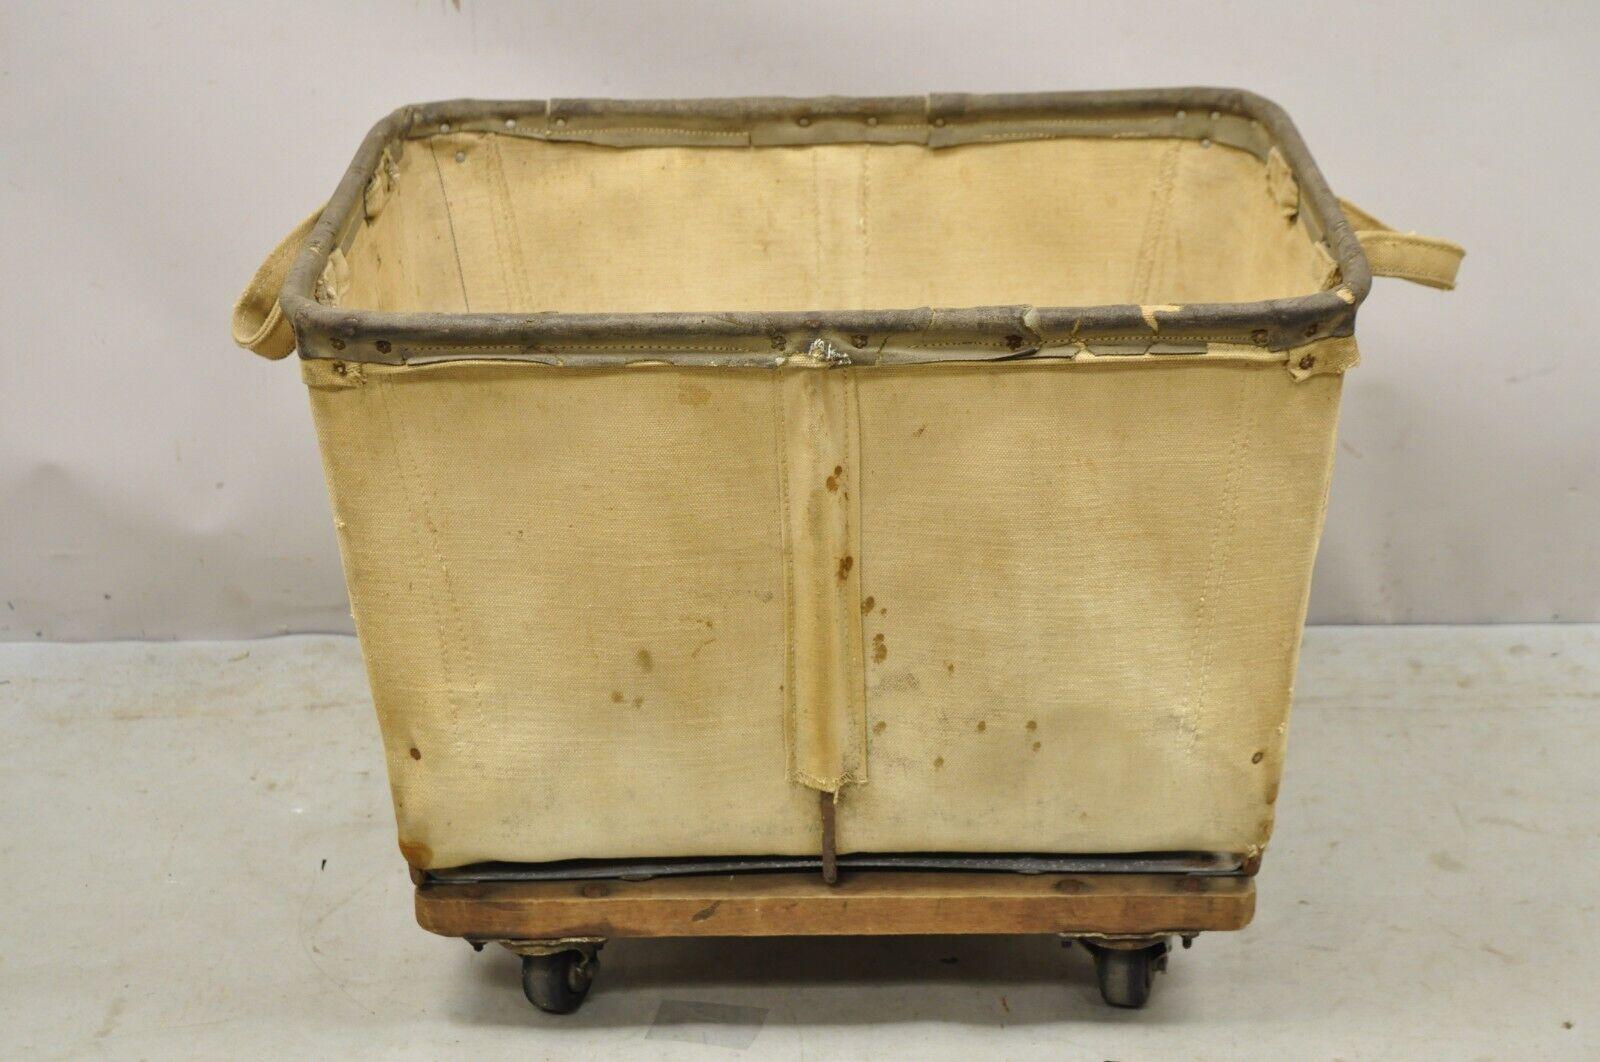 Vintage Industrial Canvas Rolling Storage Laundry Bin by Steel on Wheels. Item features rolling casters, canvas bin, very nice vintage item. Circa Mid to Late 20th Century. Measurements: 20